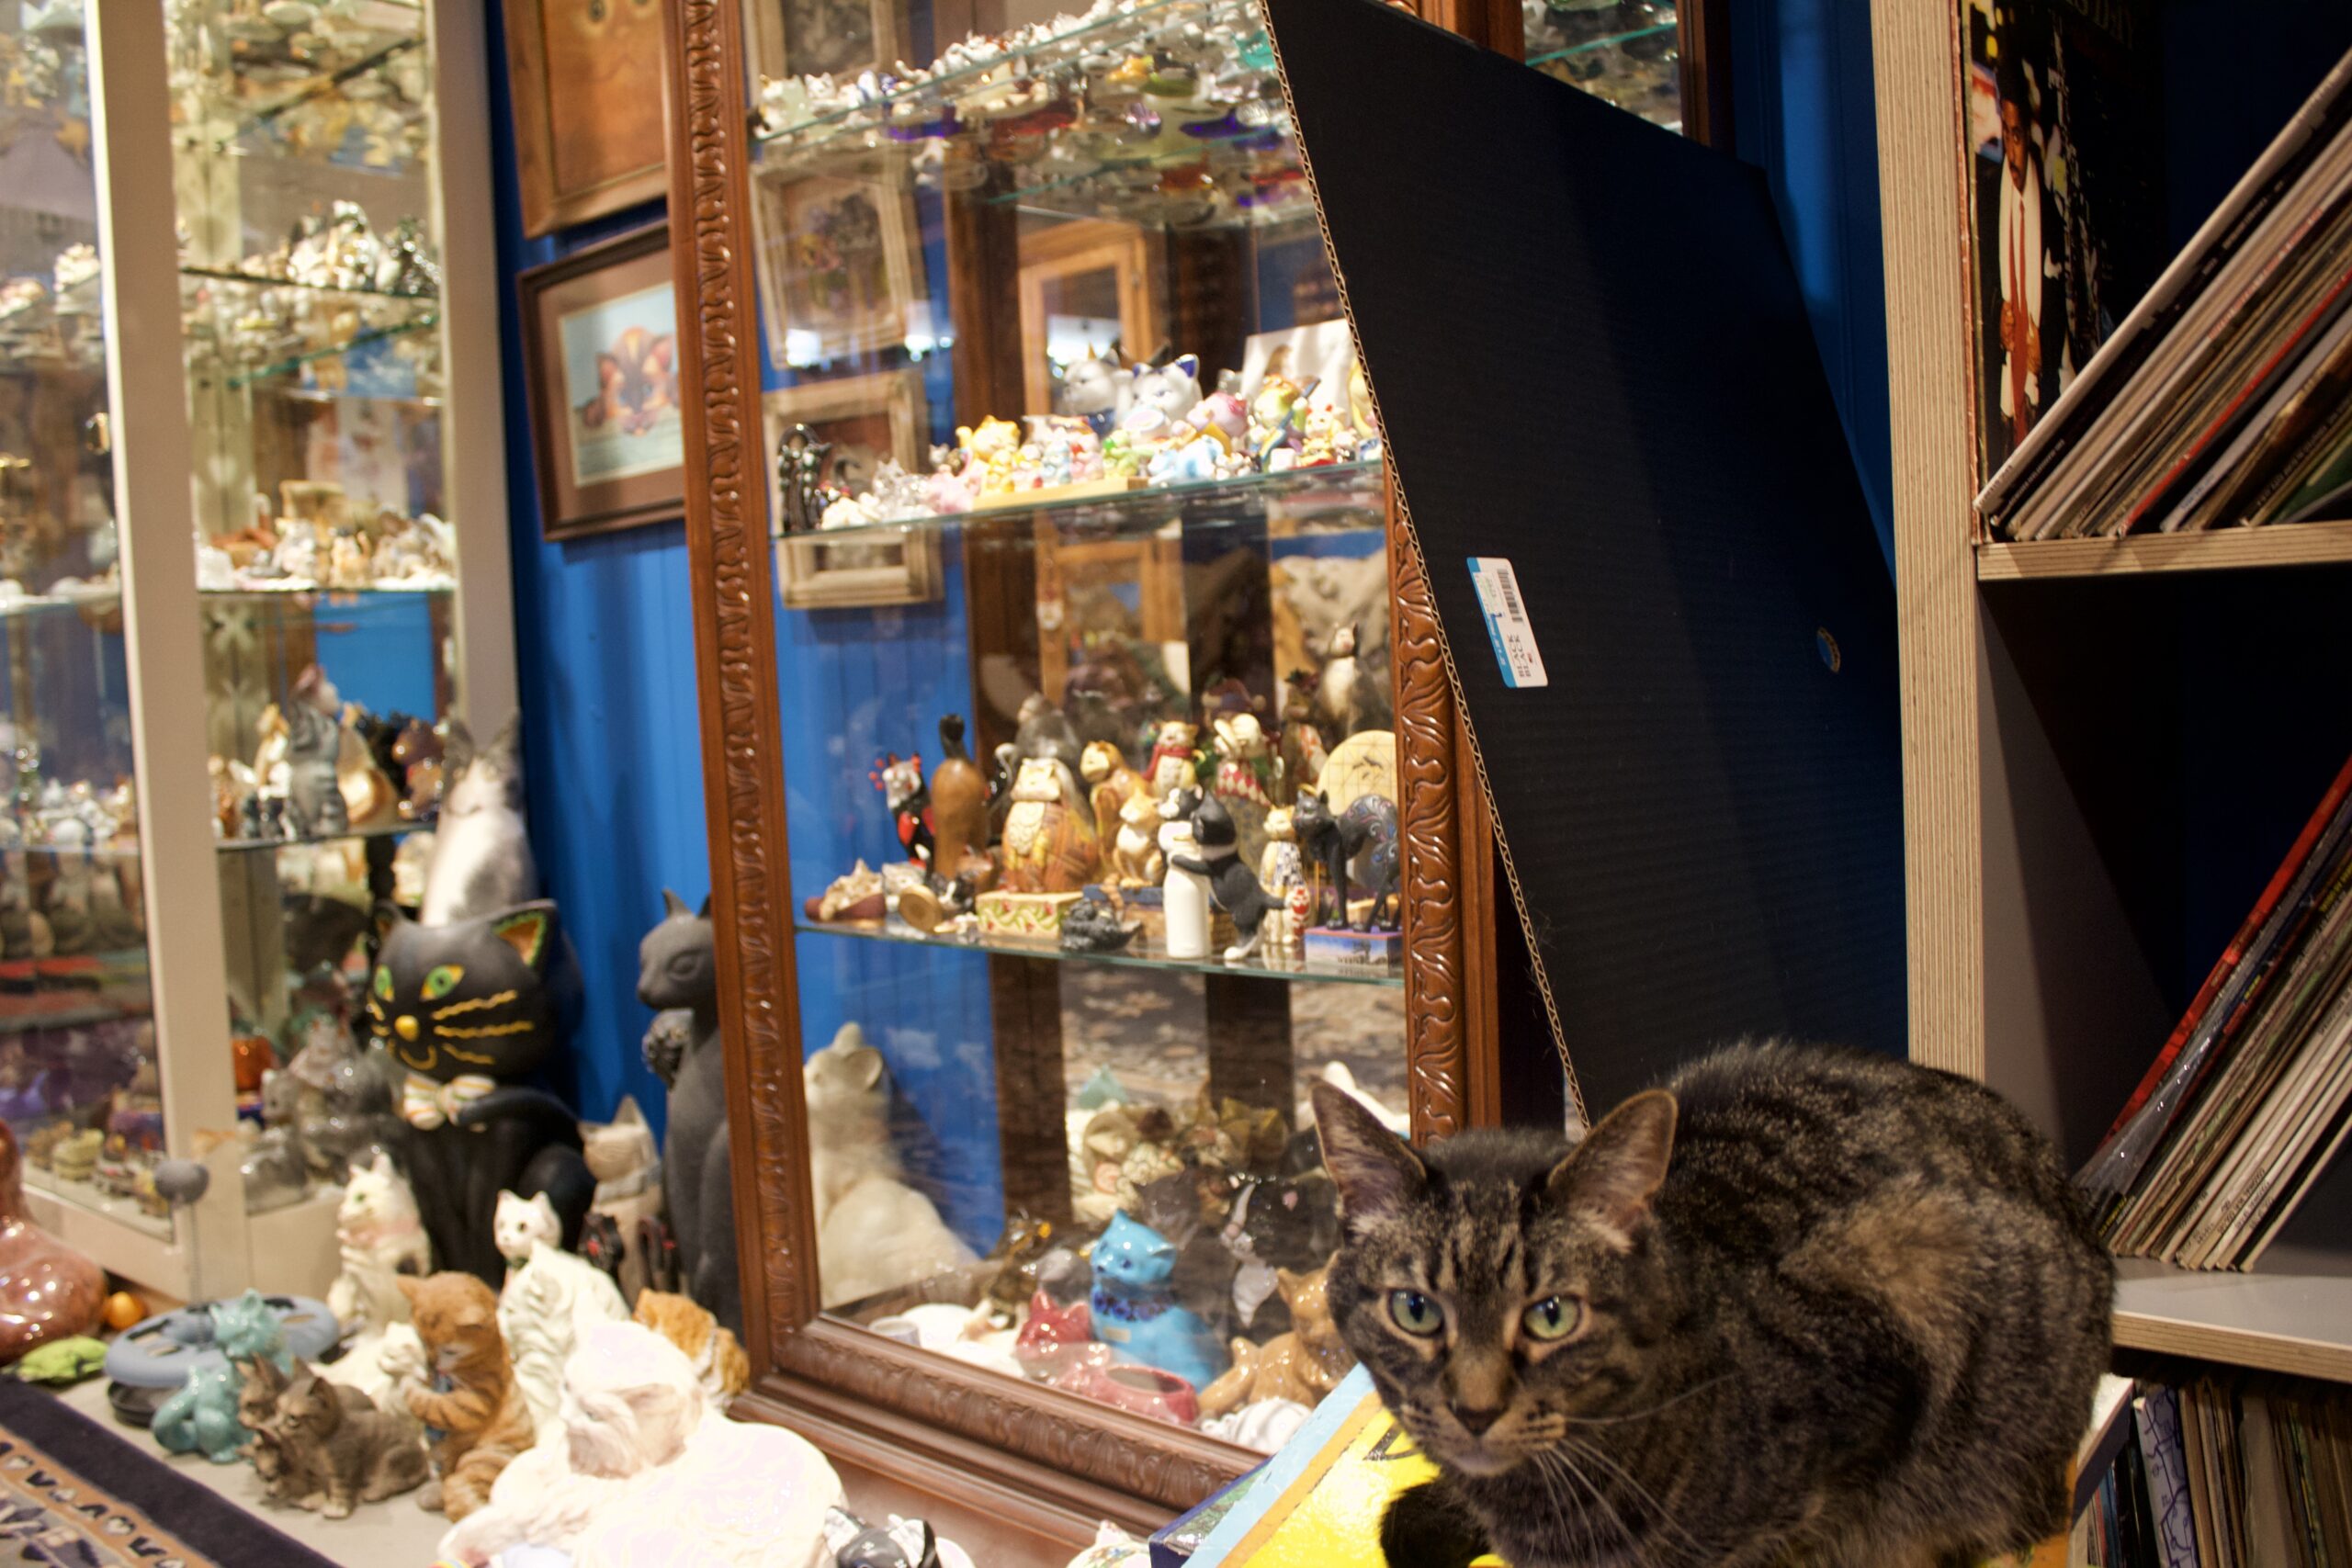 Redner's Rescued Cat Figurine Mewseum is home to nine friendly rescued cats. The cats have not damaged any of the items, according to Hilary Redner. (Trina La Susa/WPR)